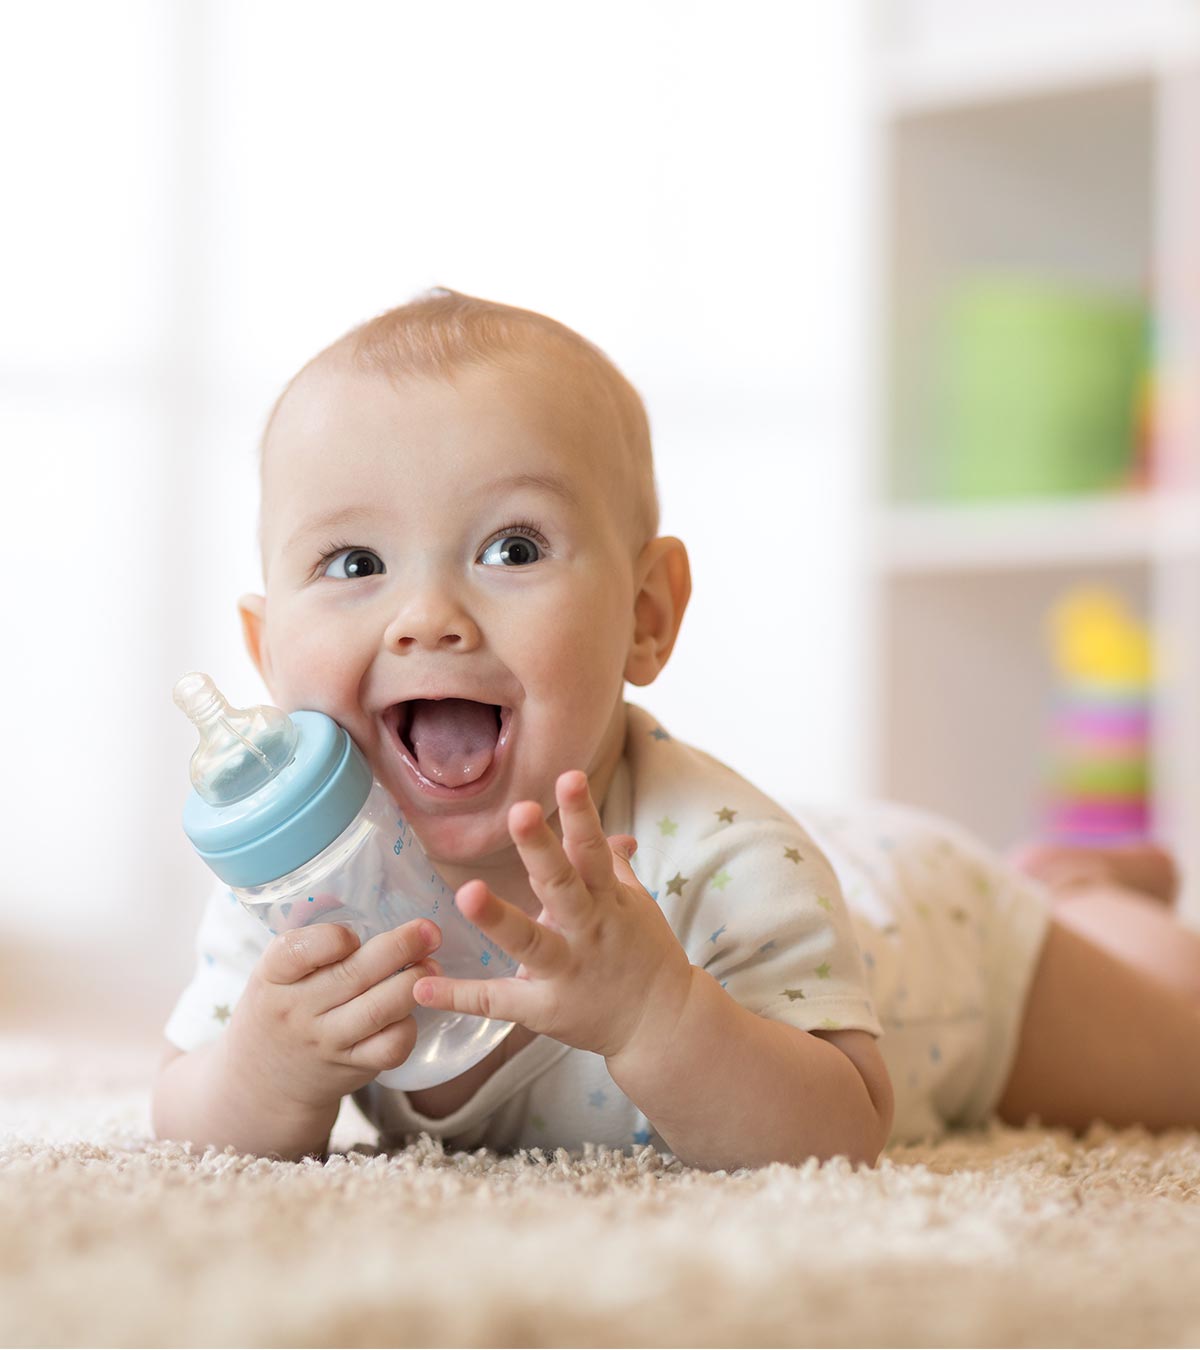 7 Things You Didn’t Know Babies Could Do